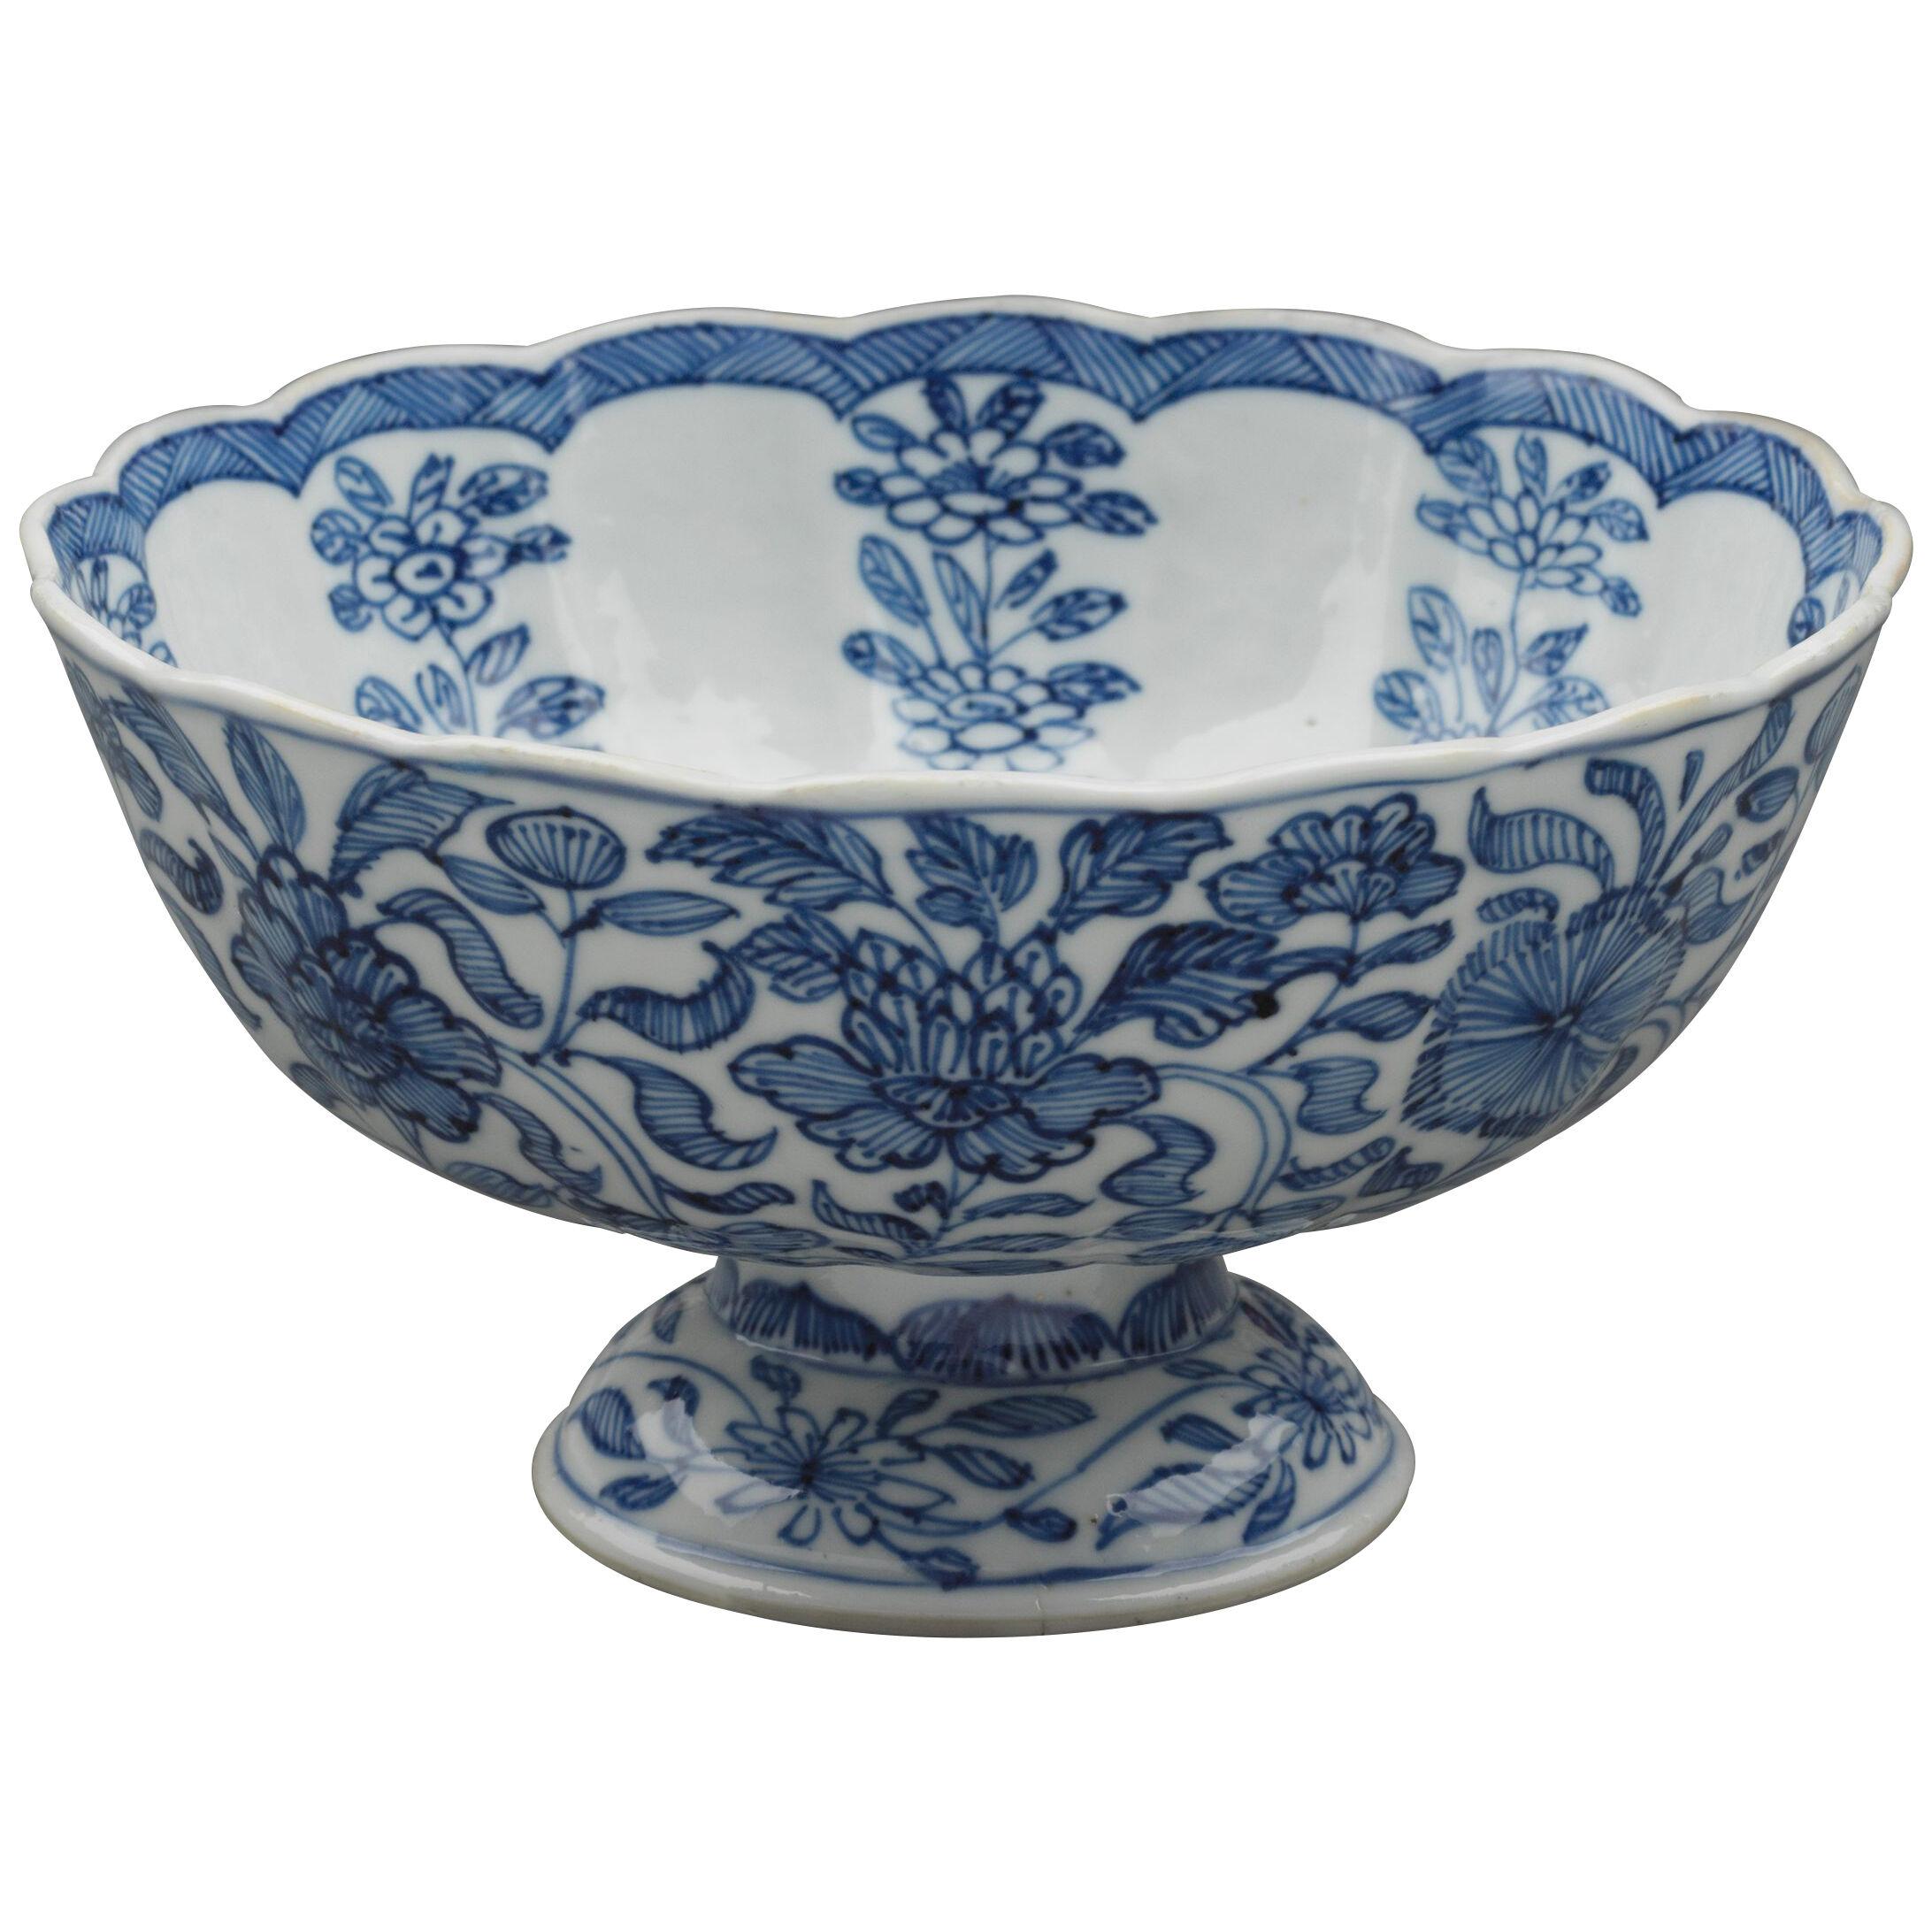 Chinese porcelain blue and white fluted stem bowl